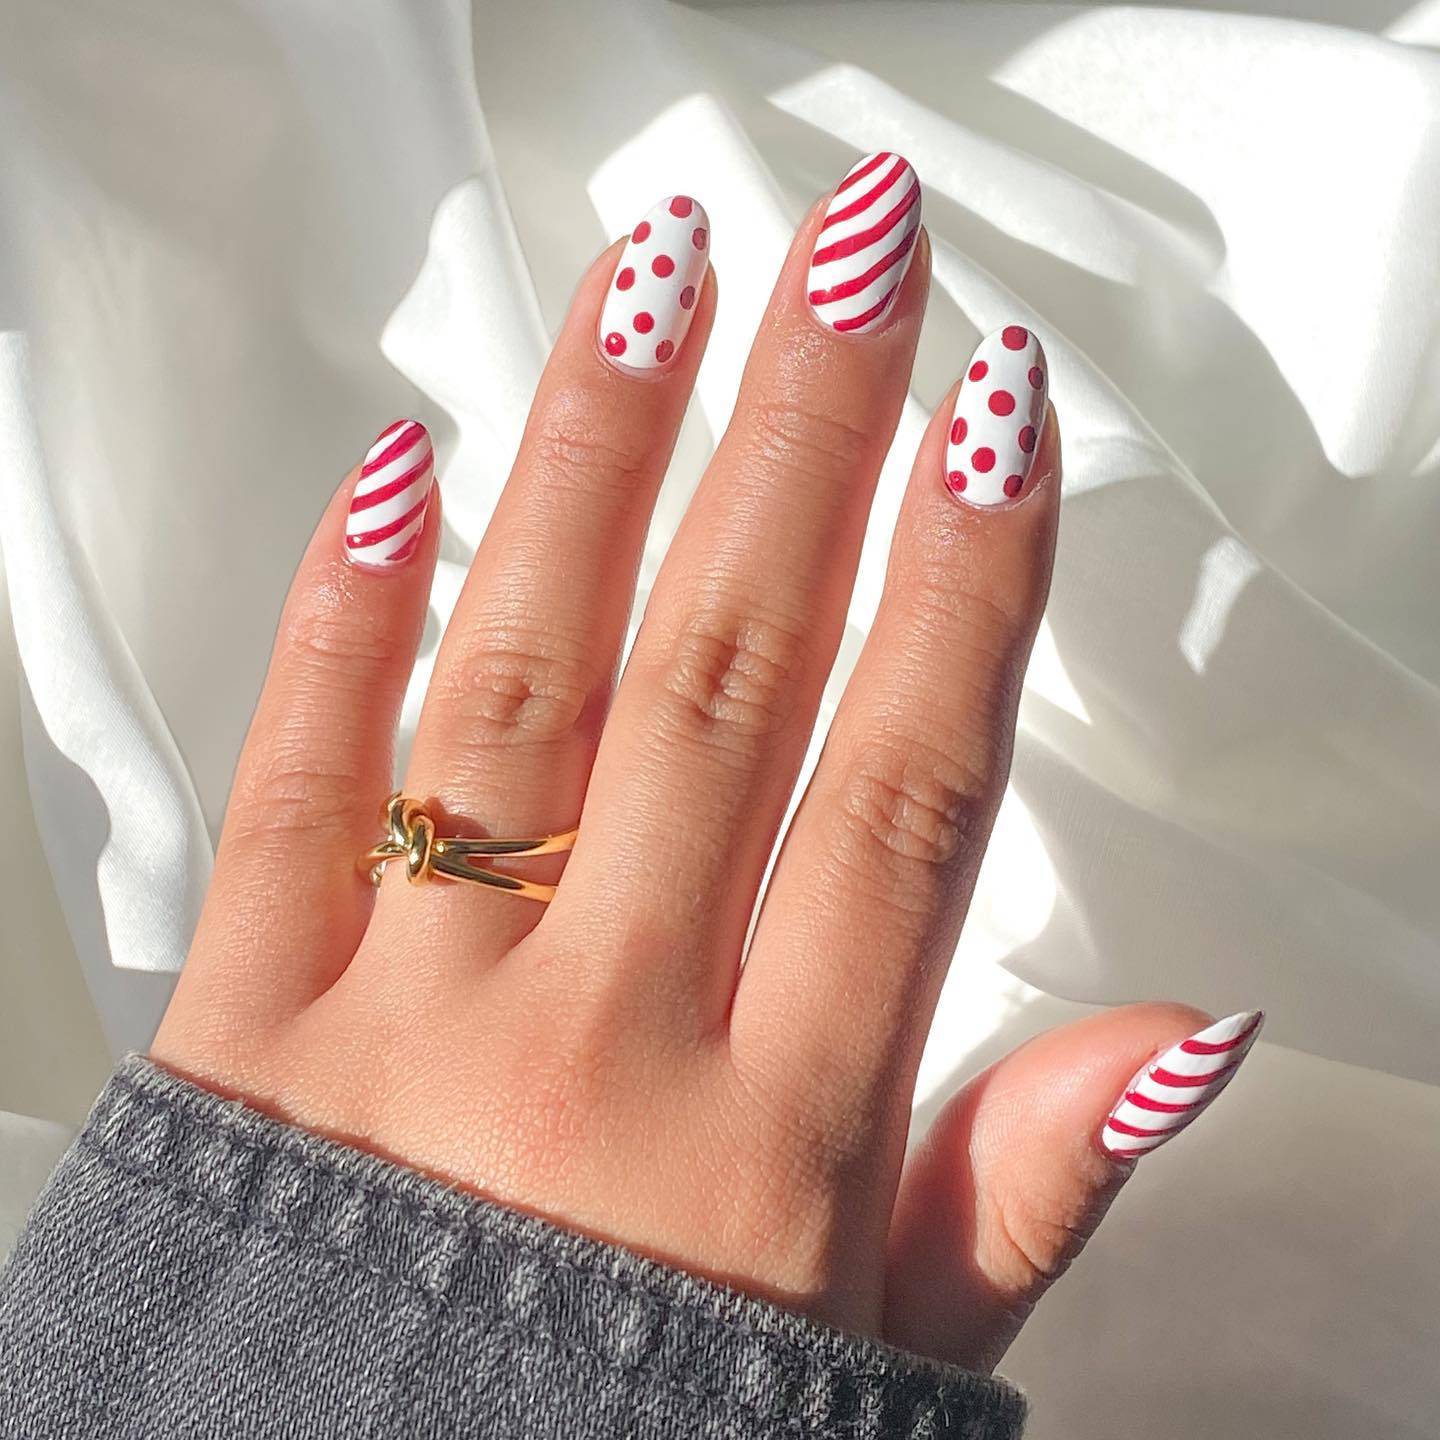 Red And White Christmas Nails